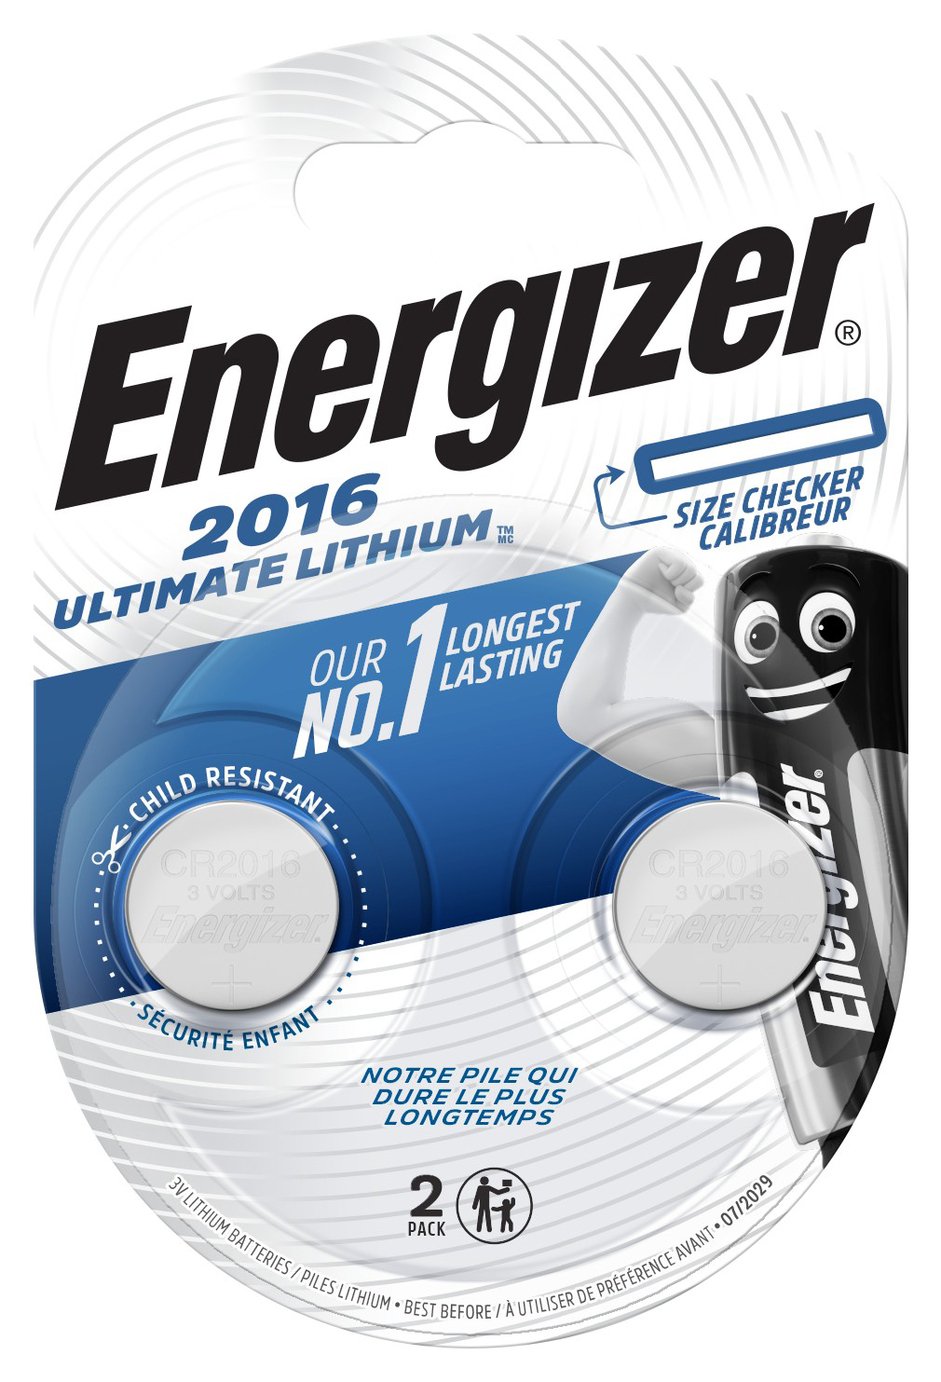 Energizer Ultimate Lithium 2016 Batteries Review